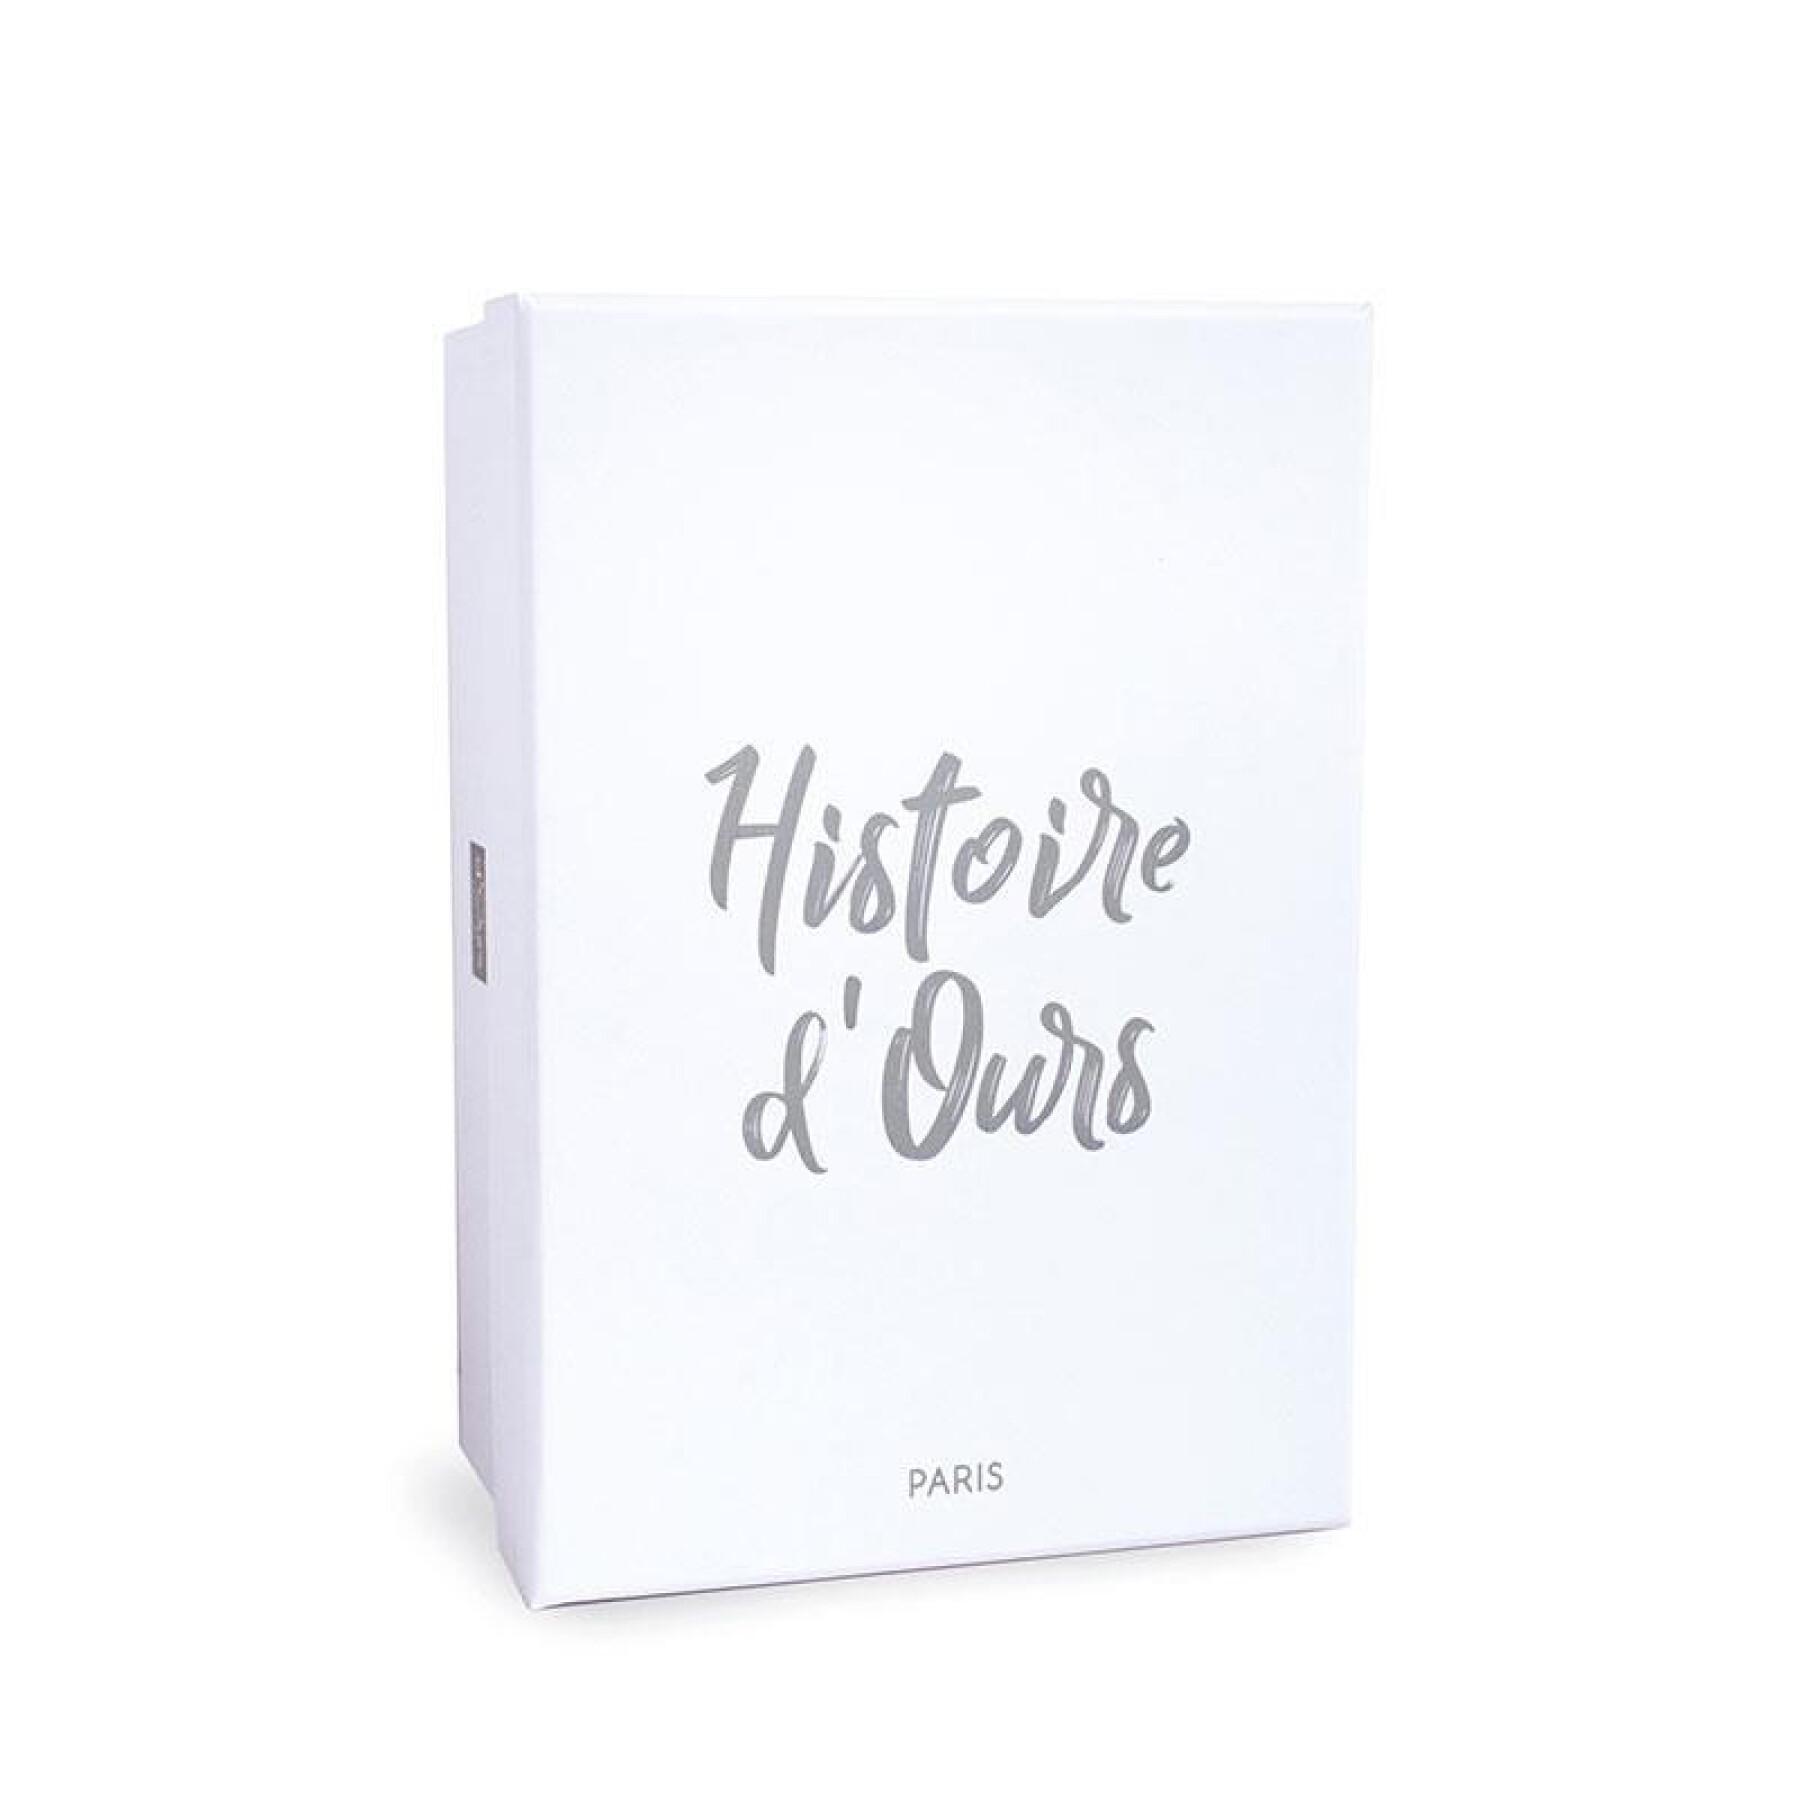 Plysch Histoire d'Ours Chien Noopy